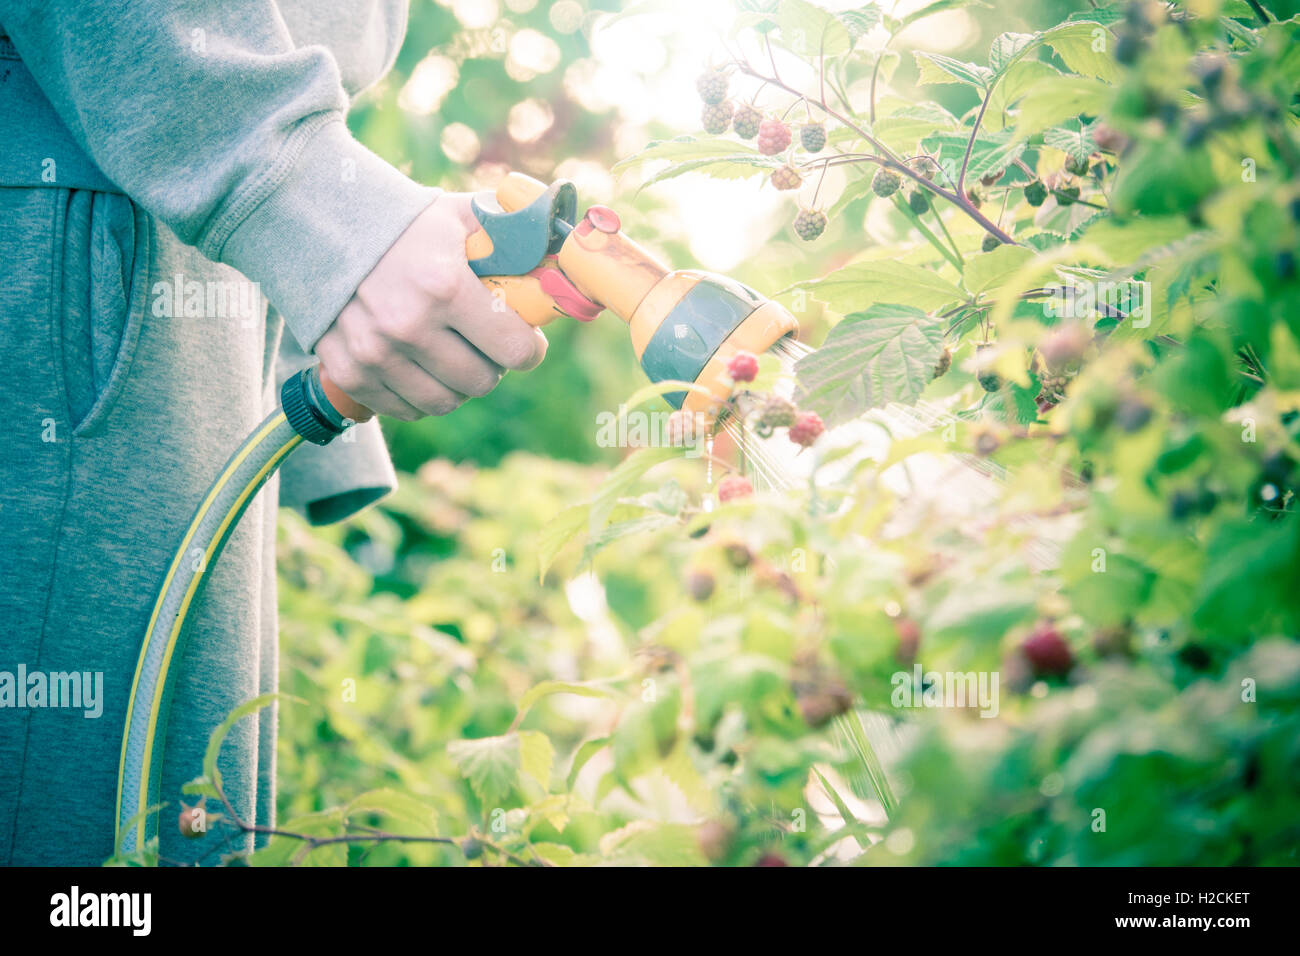 Woman holding a garden hose with sprinkler, watering plants. Summer lifestyle moment. Stock Photo